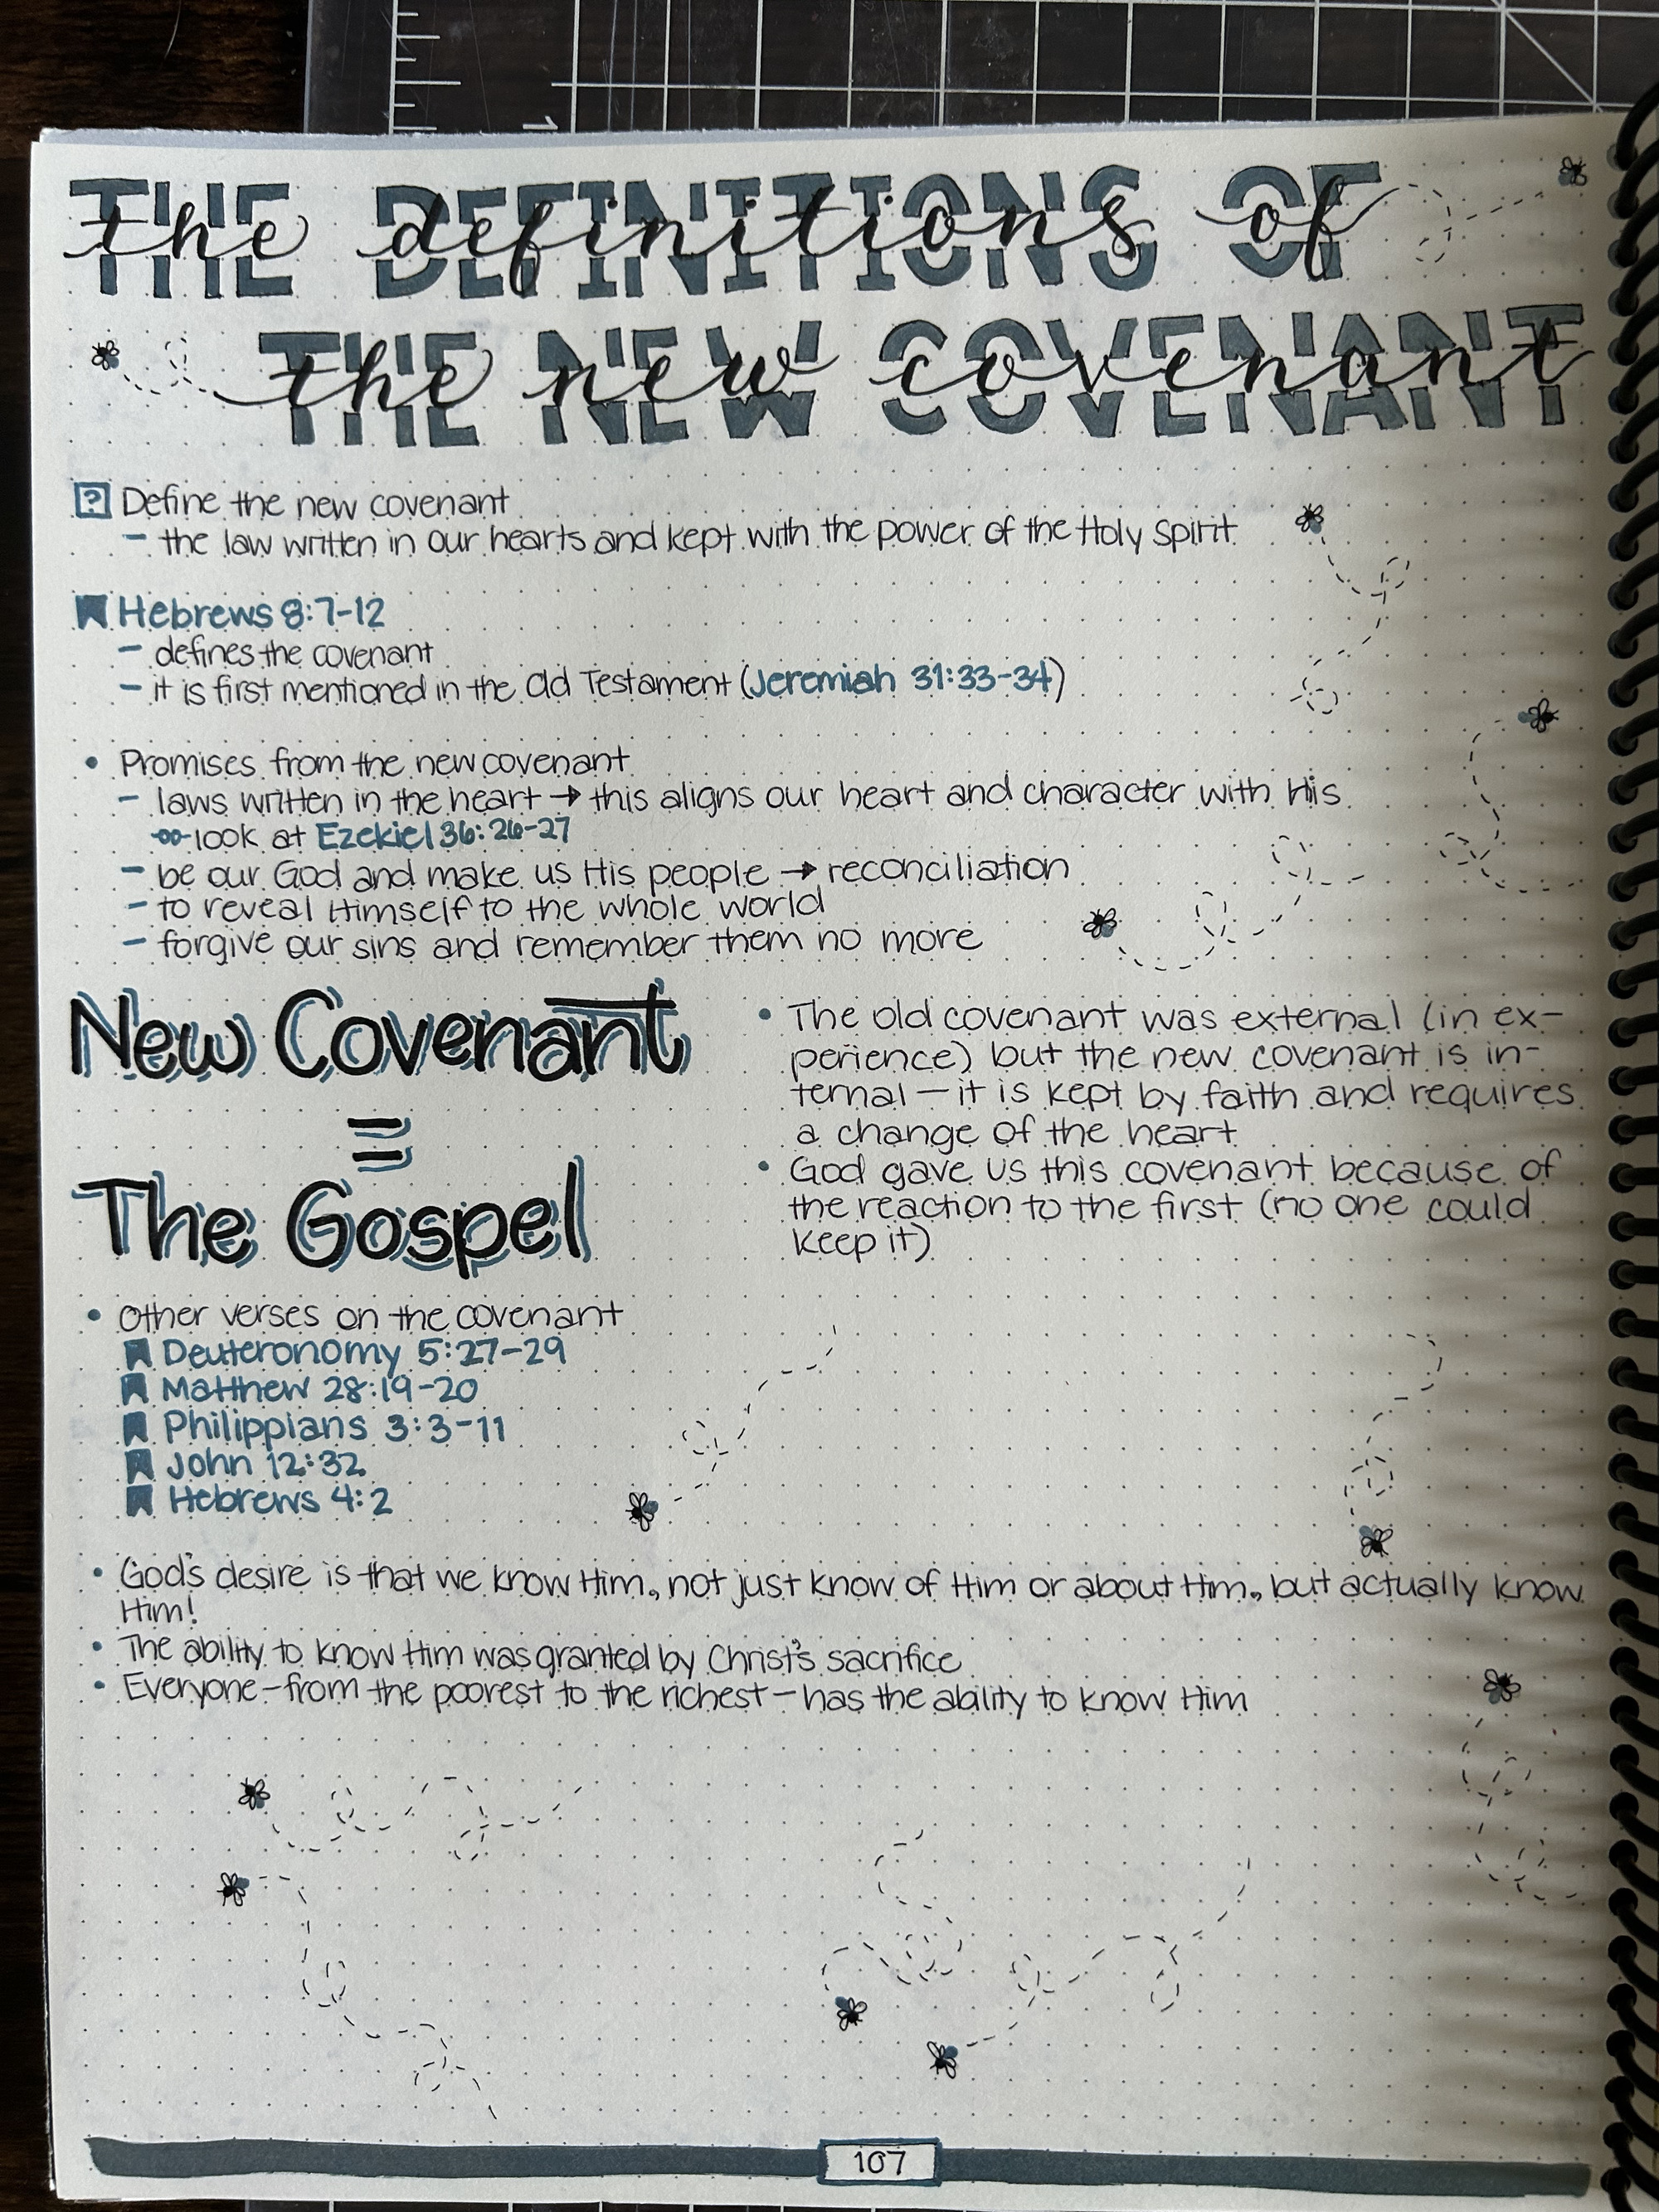 The Definitions of the New Covenant